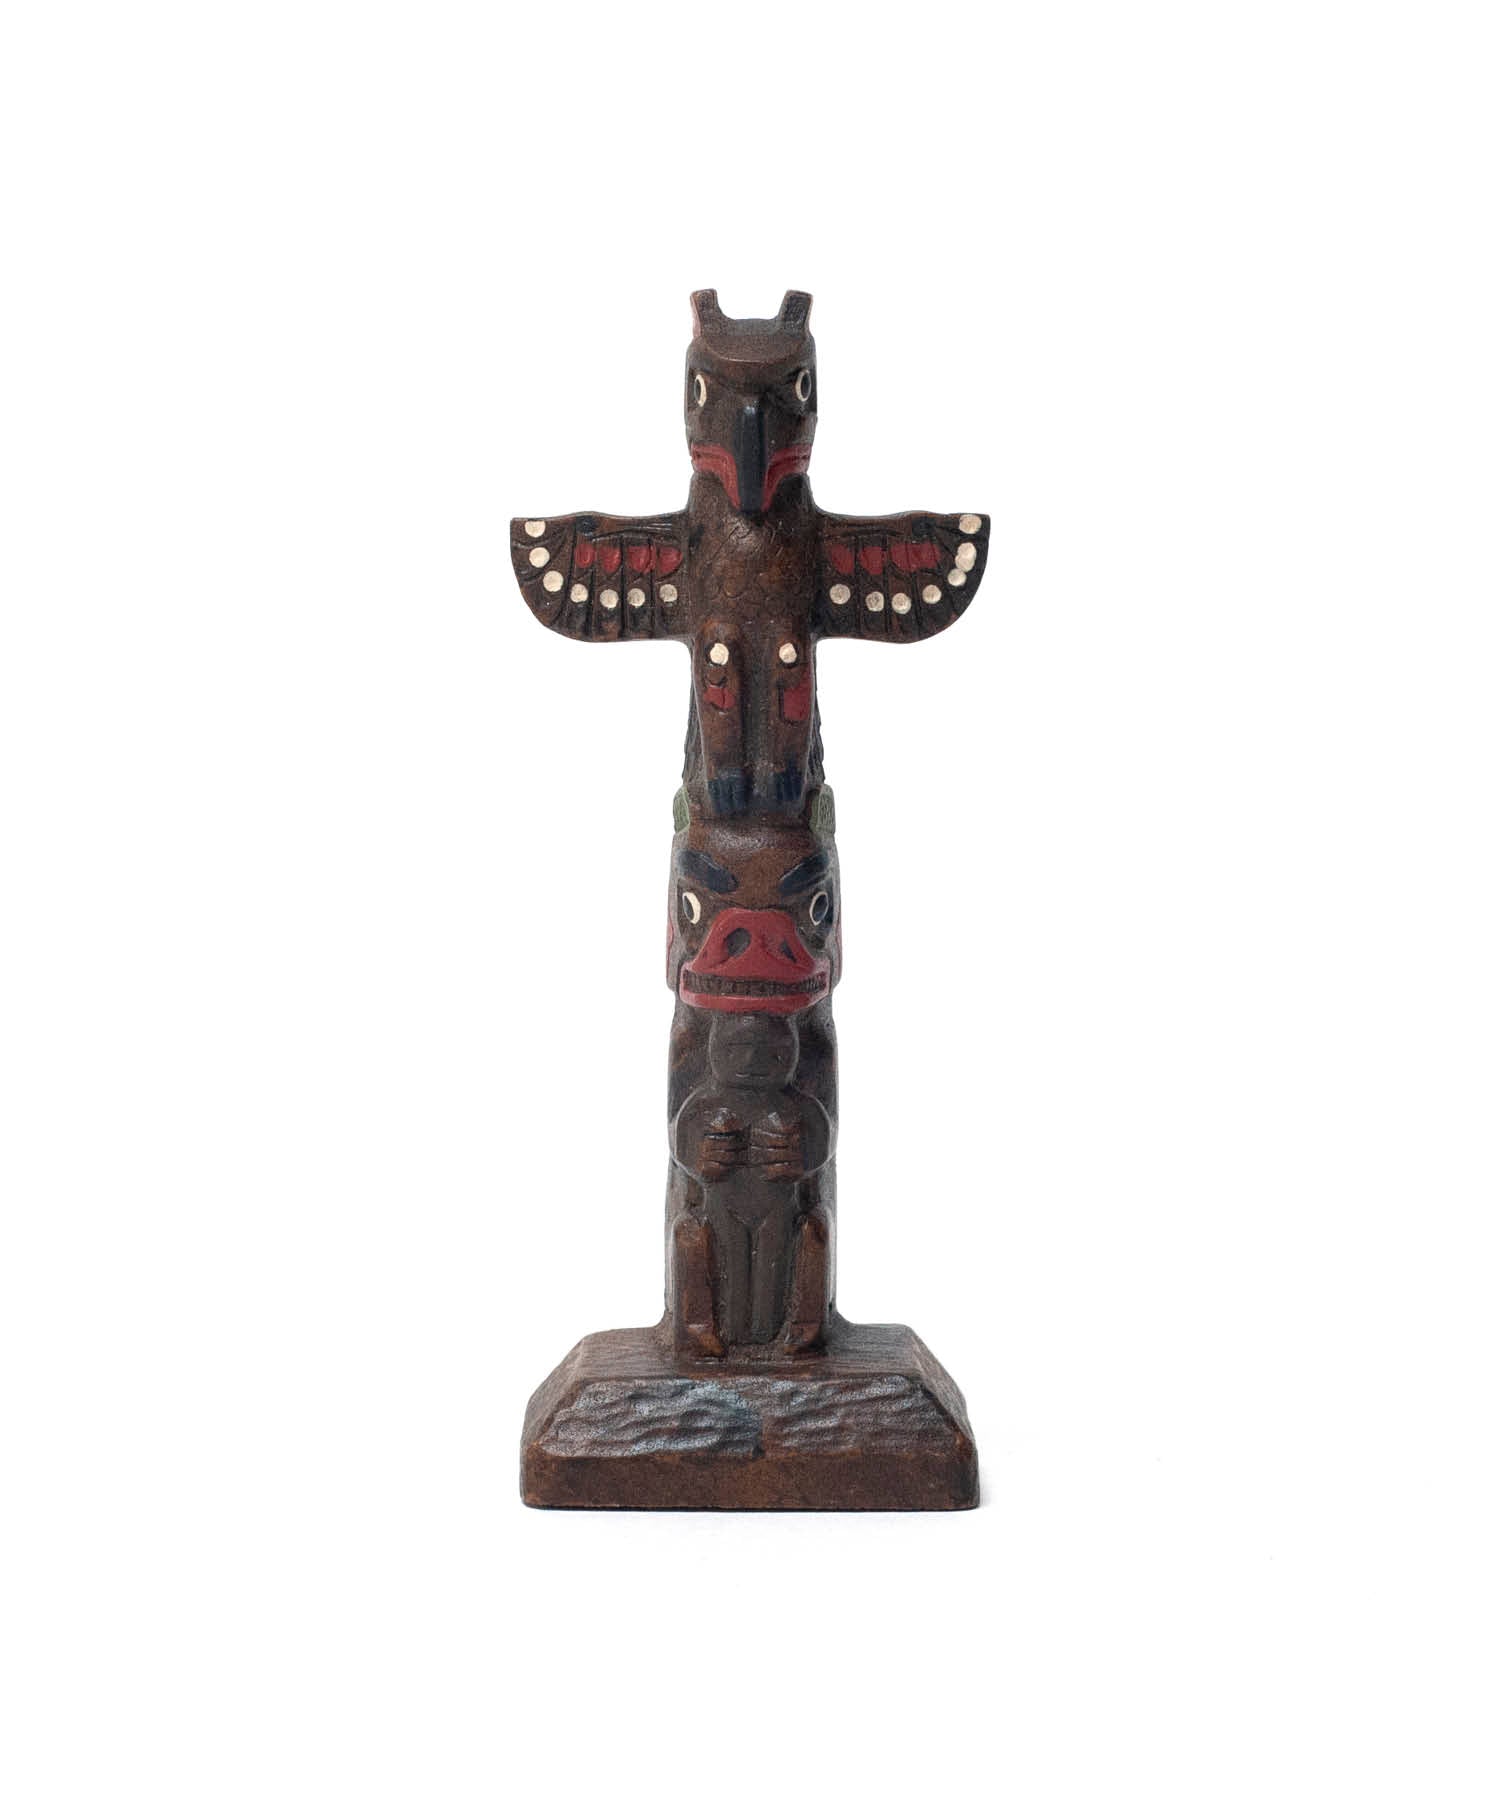 Vintage Object : Canadian Totem Pole | LIKE THIS SHOP